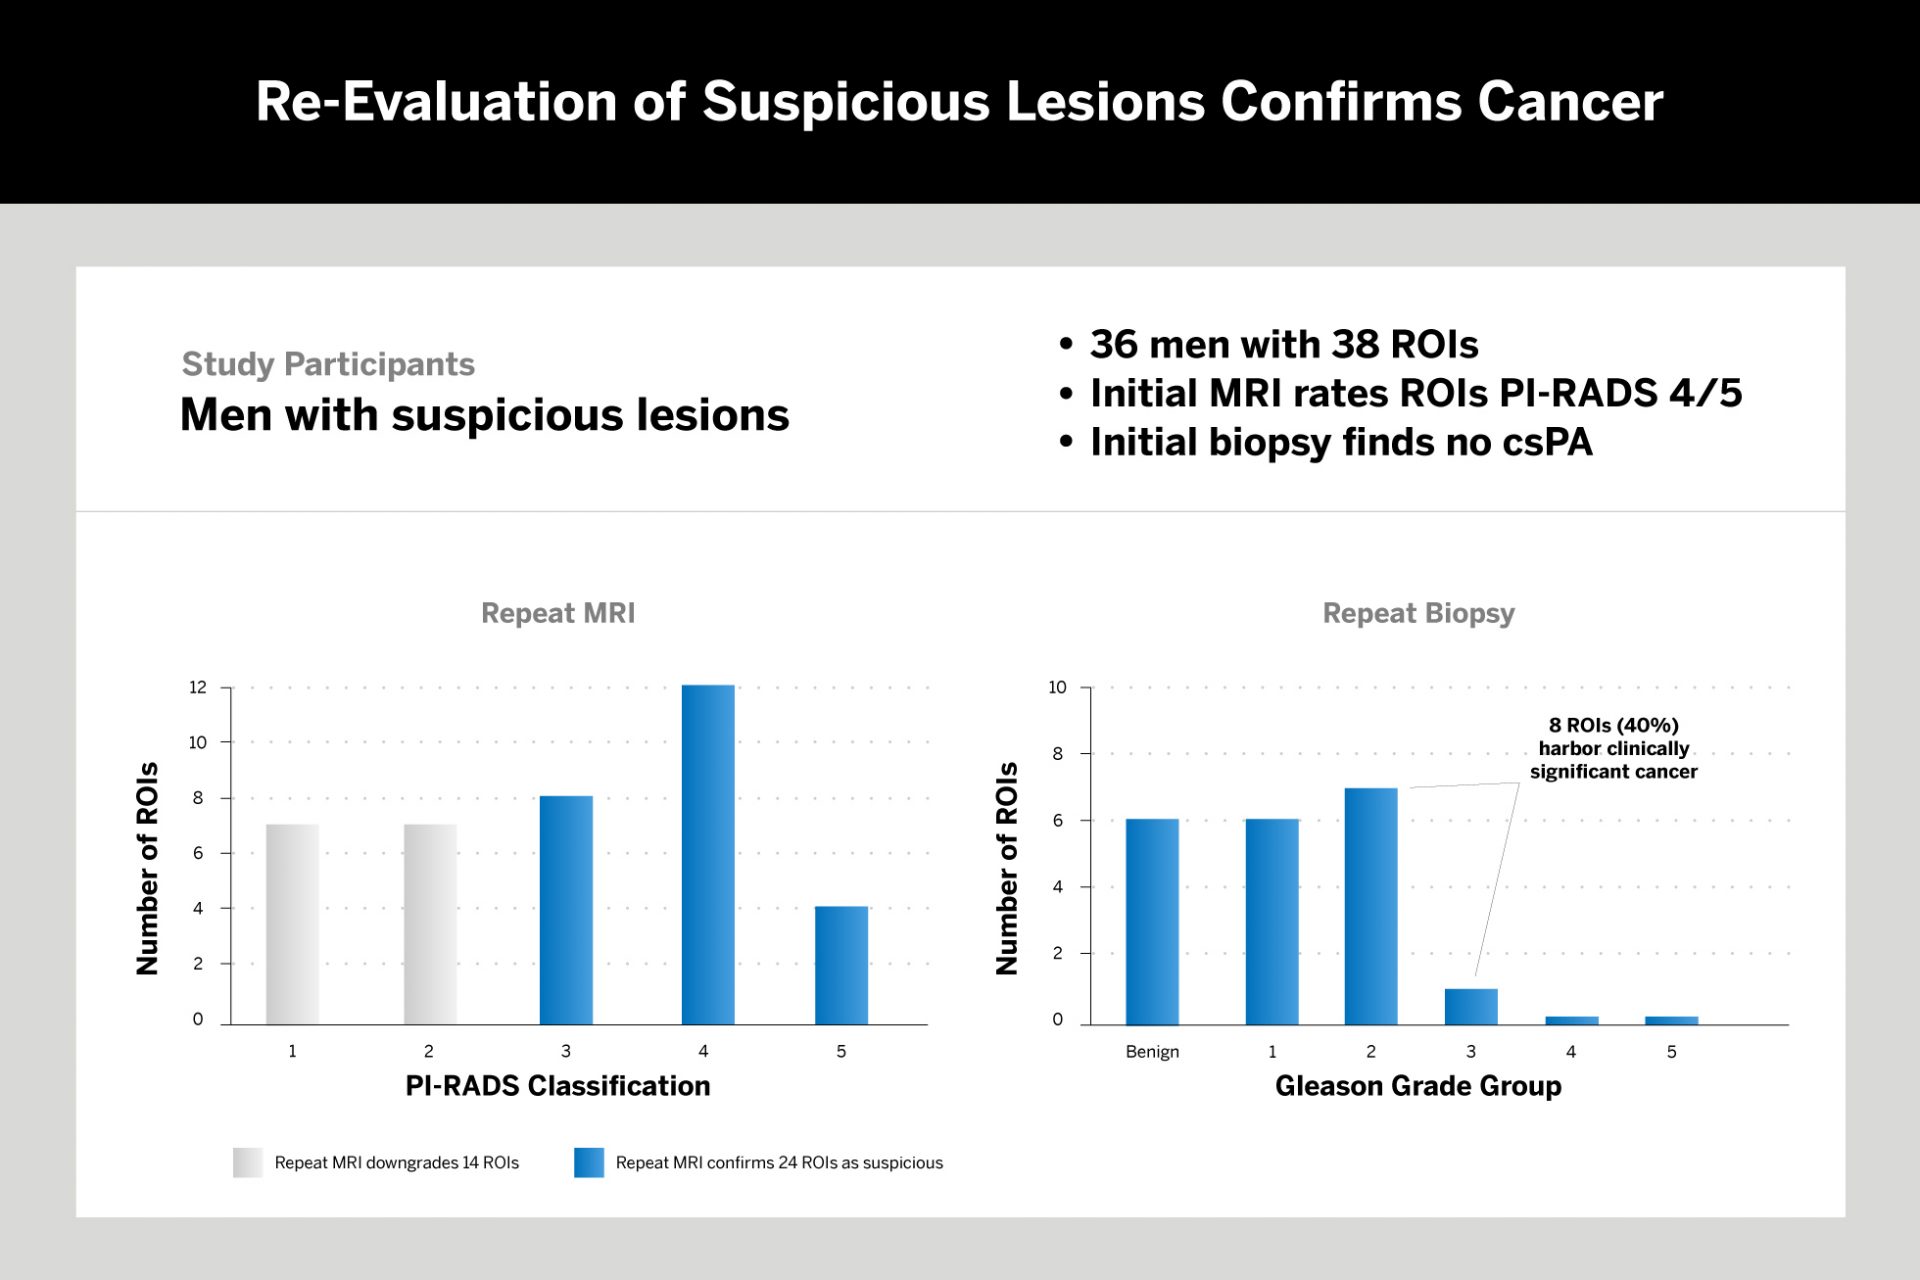 All 36 men (38 ROIs) enrolled to the study with PI-RADS 4/5 ROI and no clinically significant prostate cancer (csPA) on initial biopsy underwent repeat MRI, following which 14 ROIs were downgraded while 24 ROIs remained suspicious. Of the 20 ROIs that underwent repeat biopsy, 30% were benign, 30% were Gleason grade group (GGG) 1, and 40% were GGG ≥ 2.